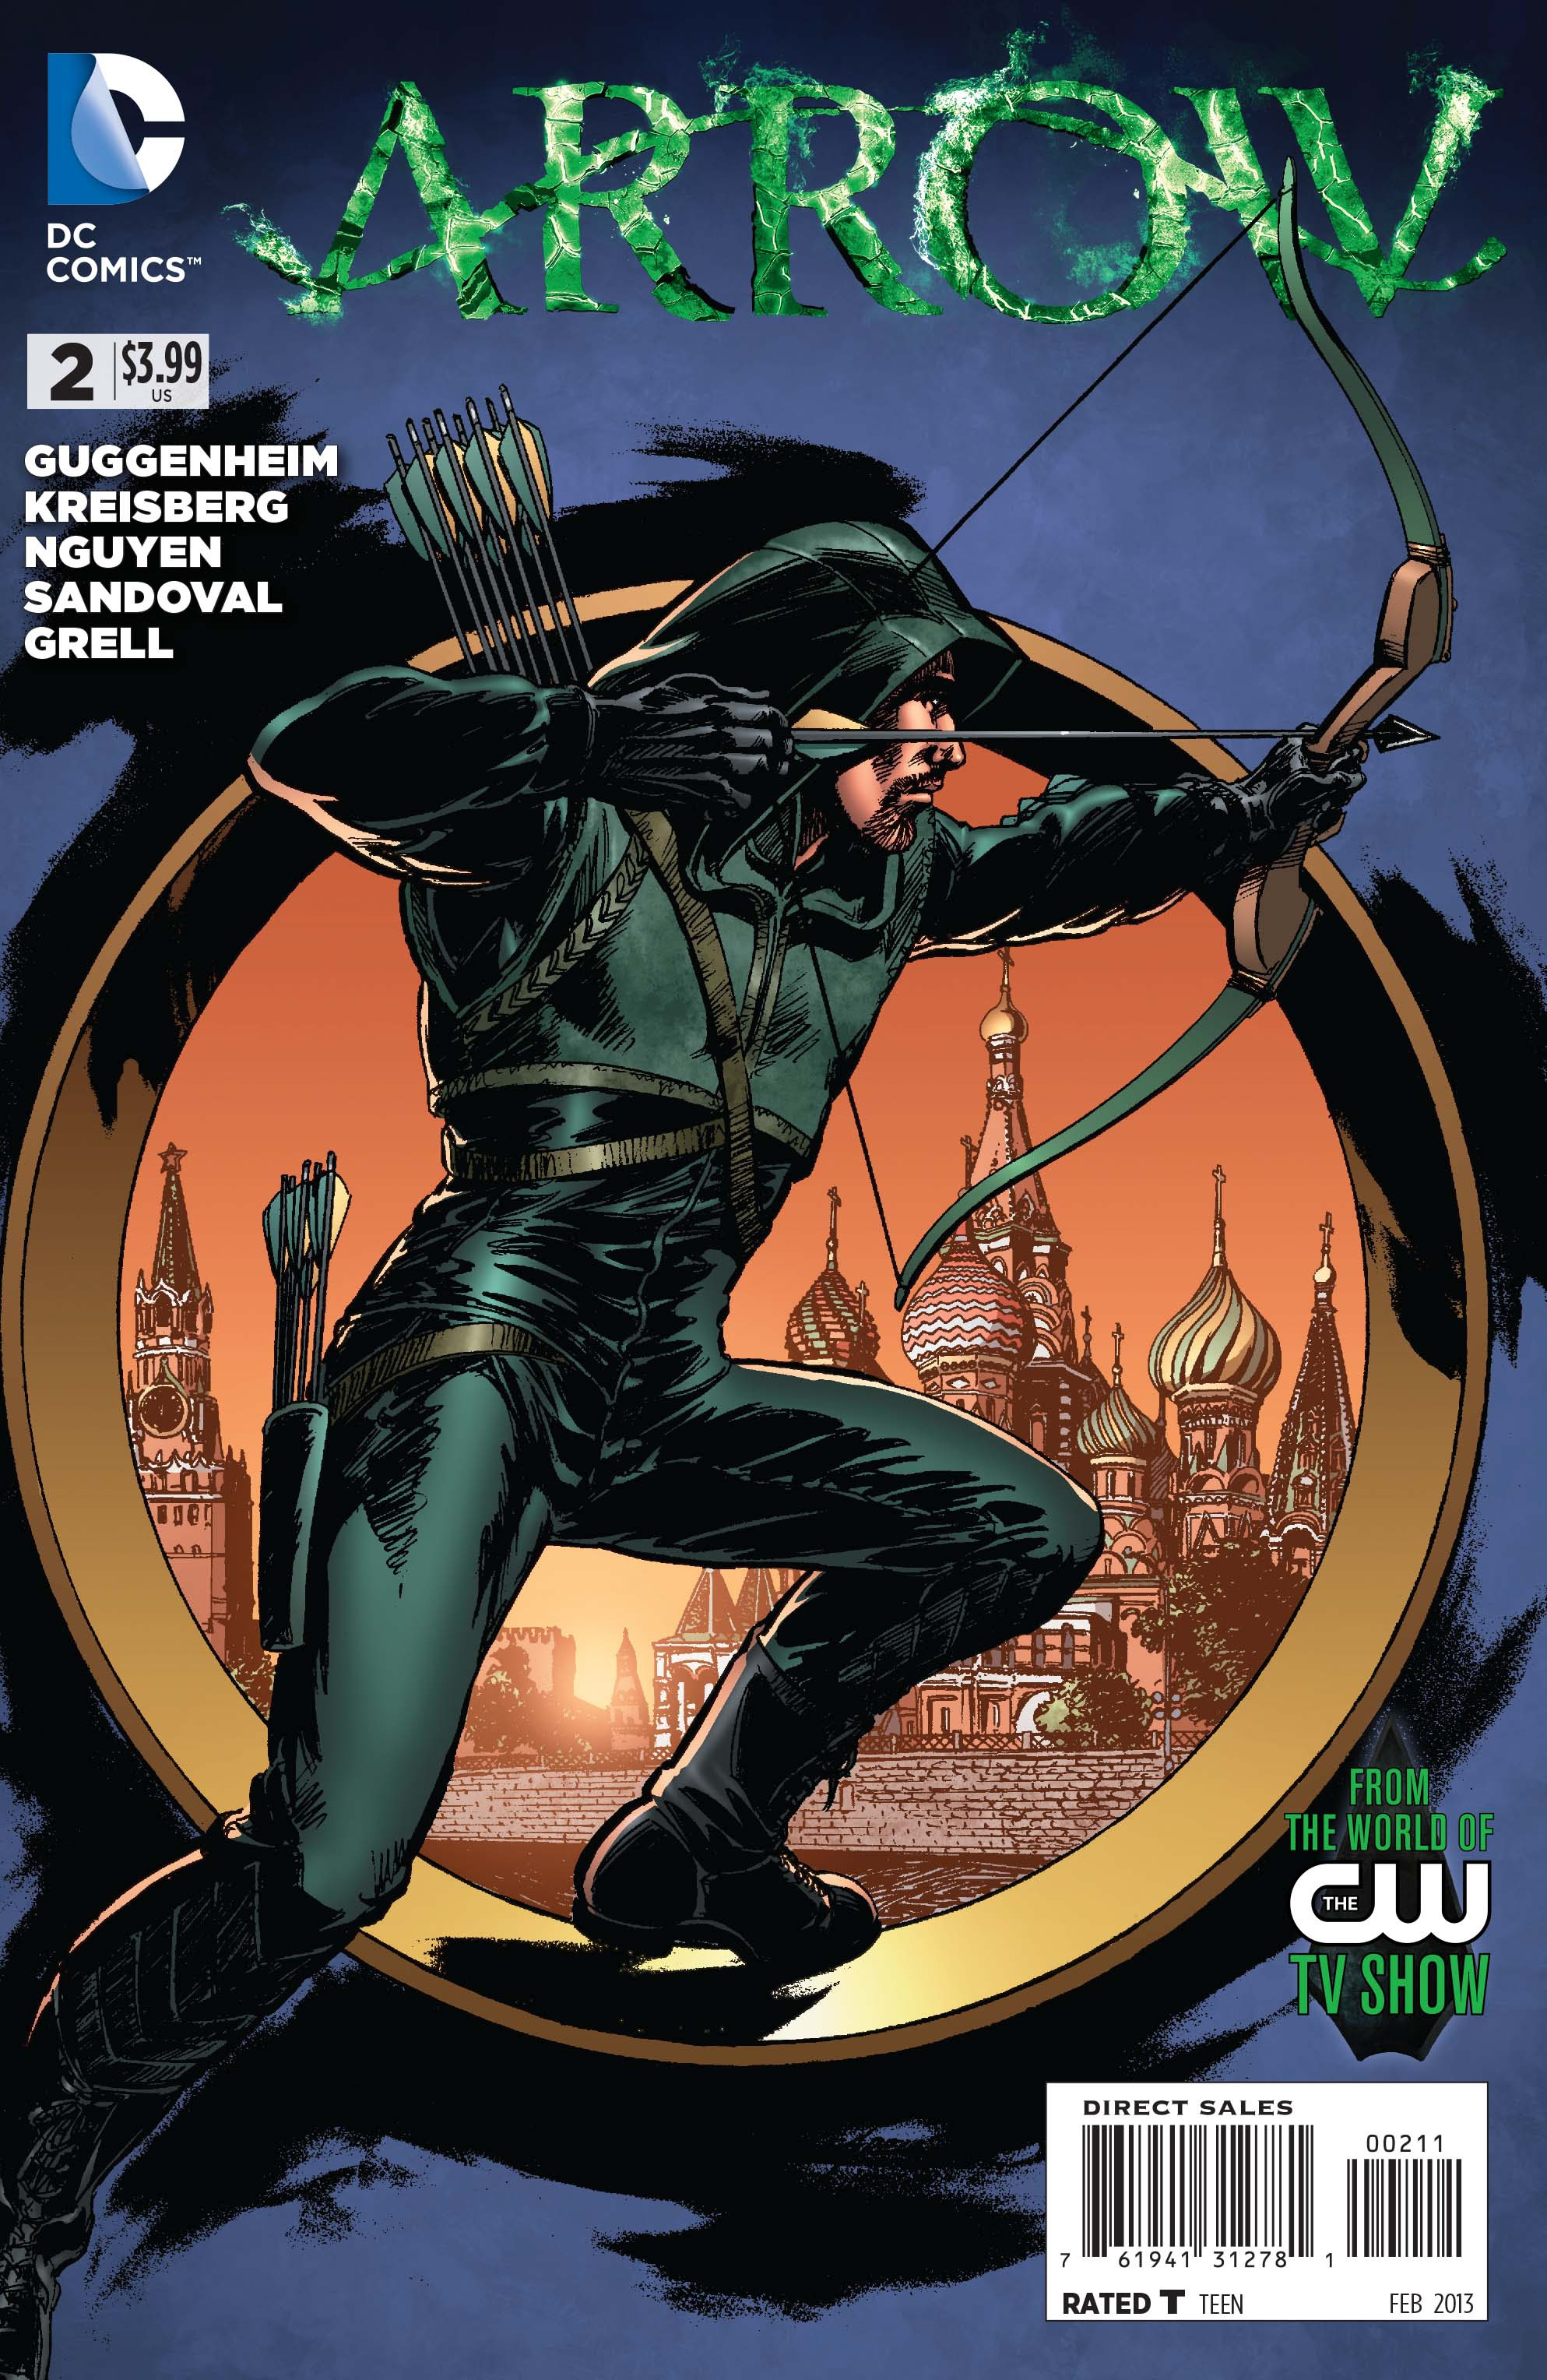  comic book based on the hit CW series which is, in turn, based on DC